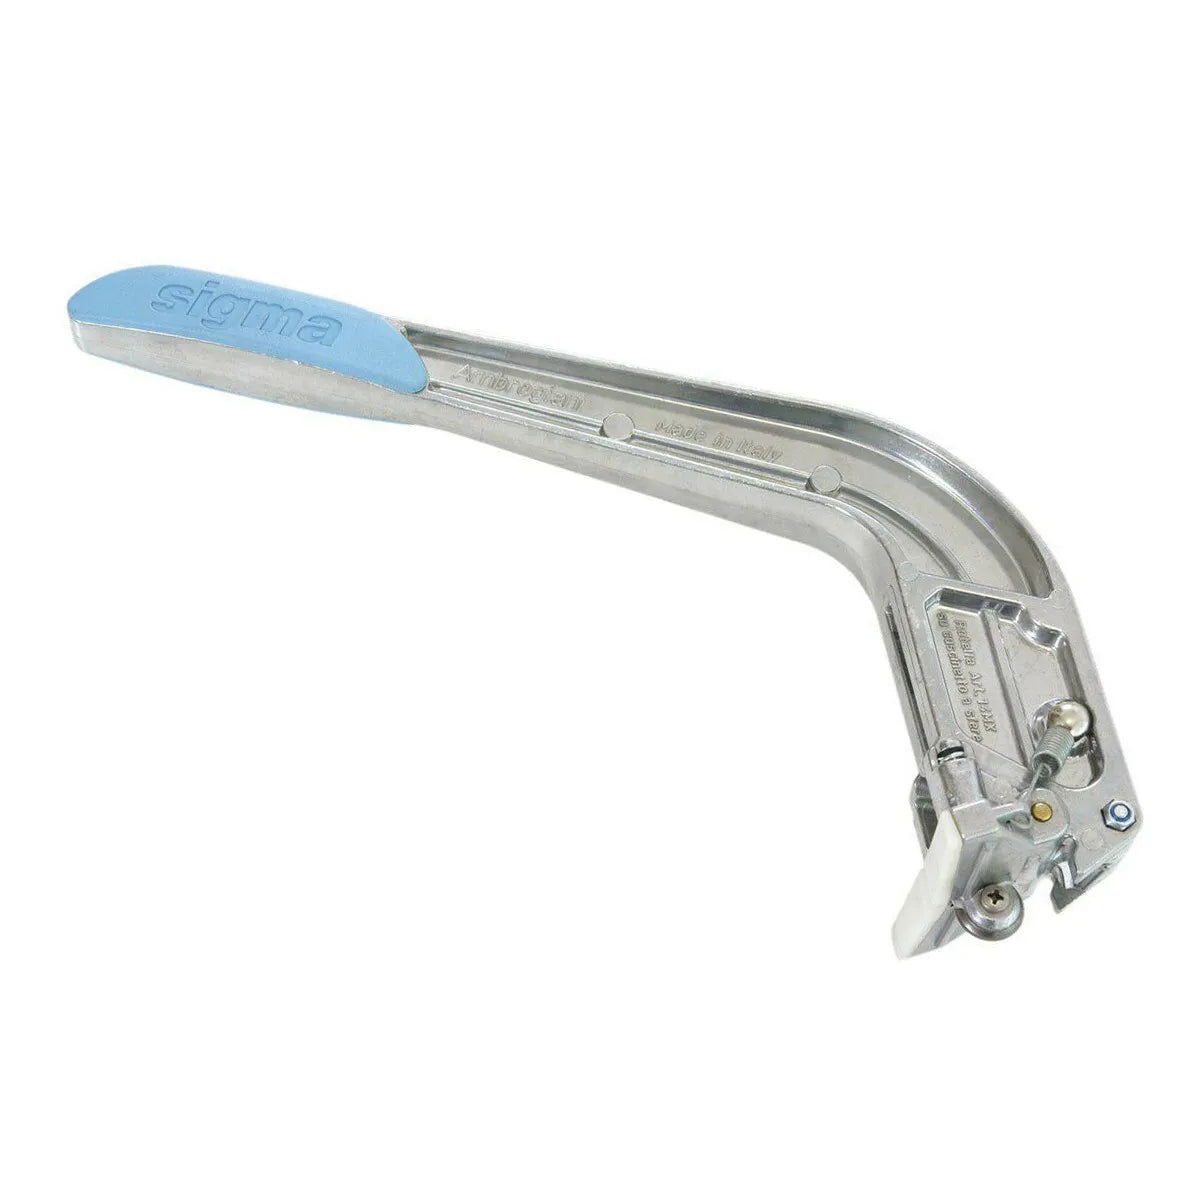 Max Handle for Sigma 3E Tile Cutter